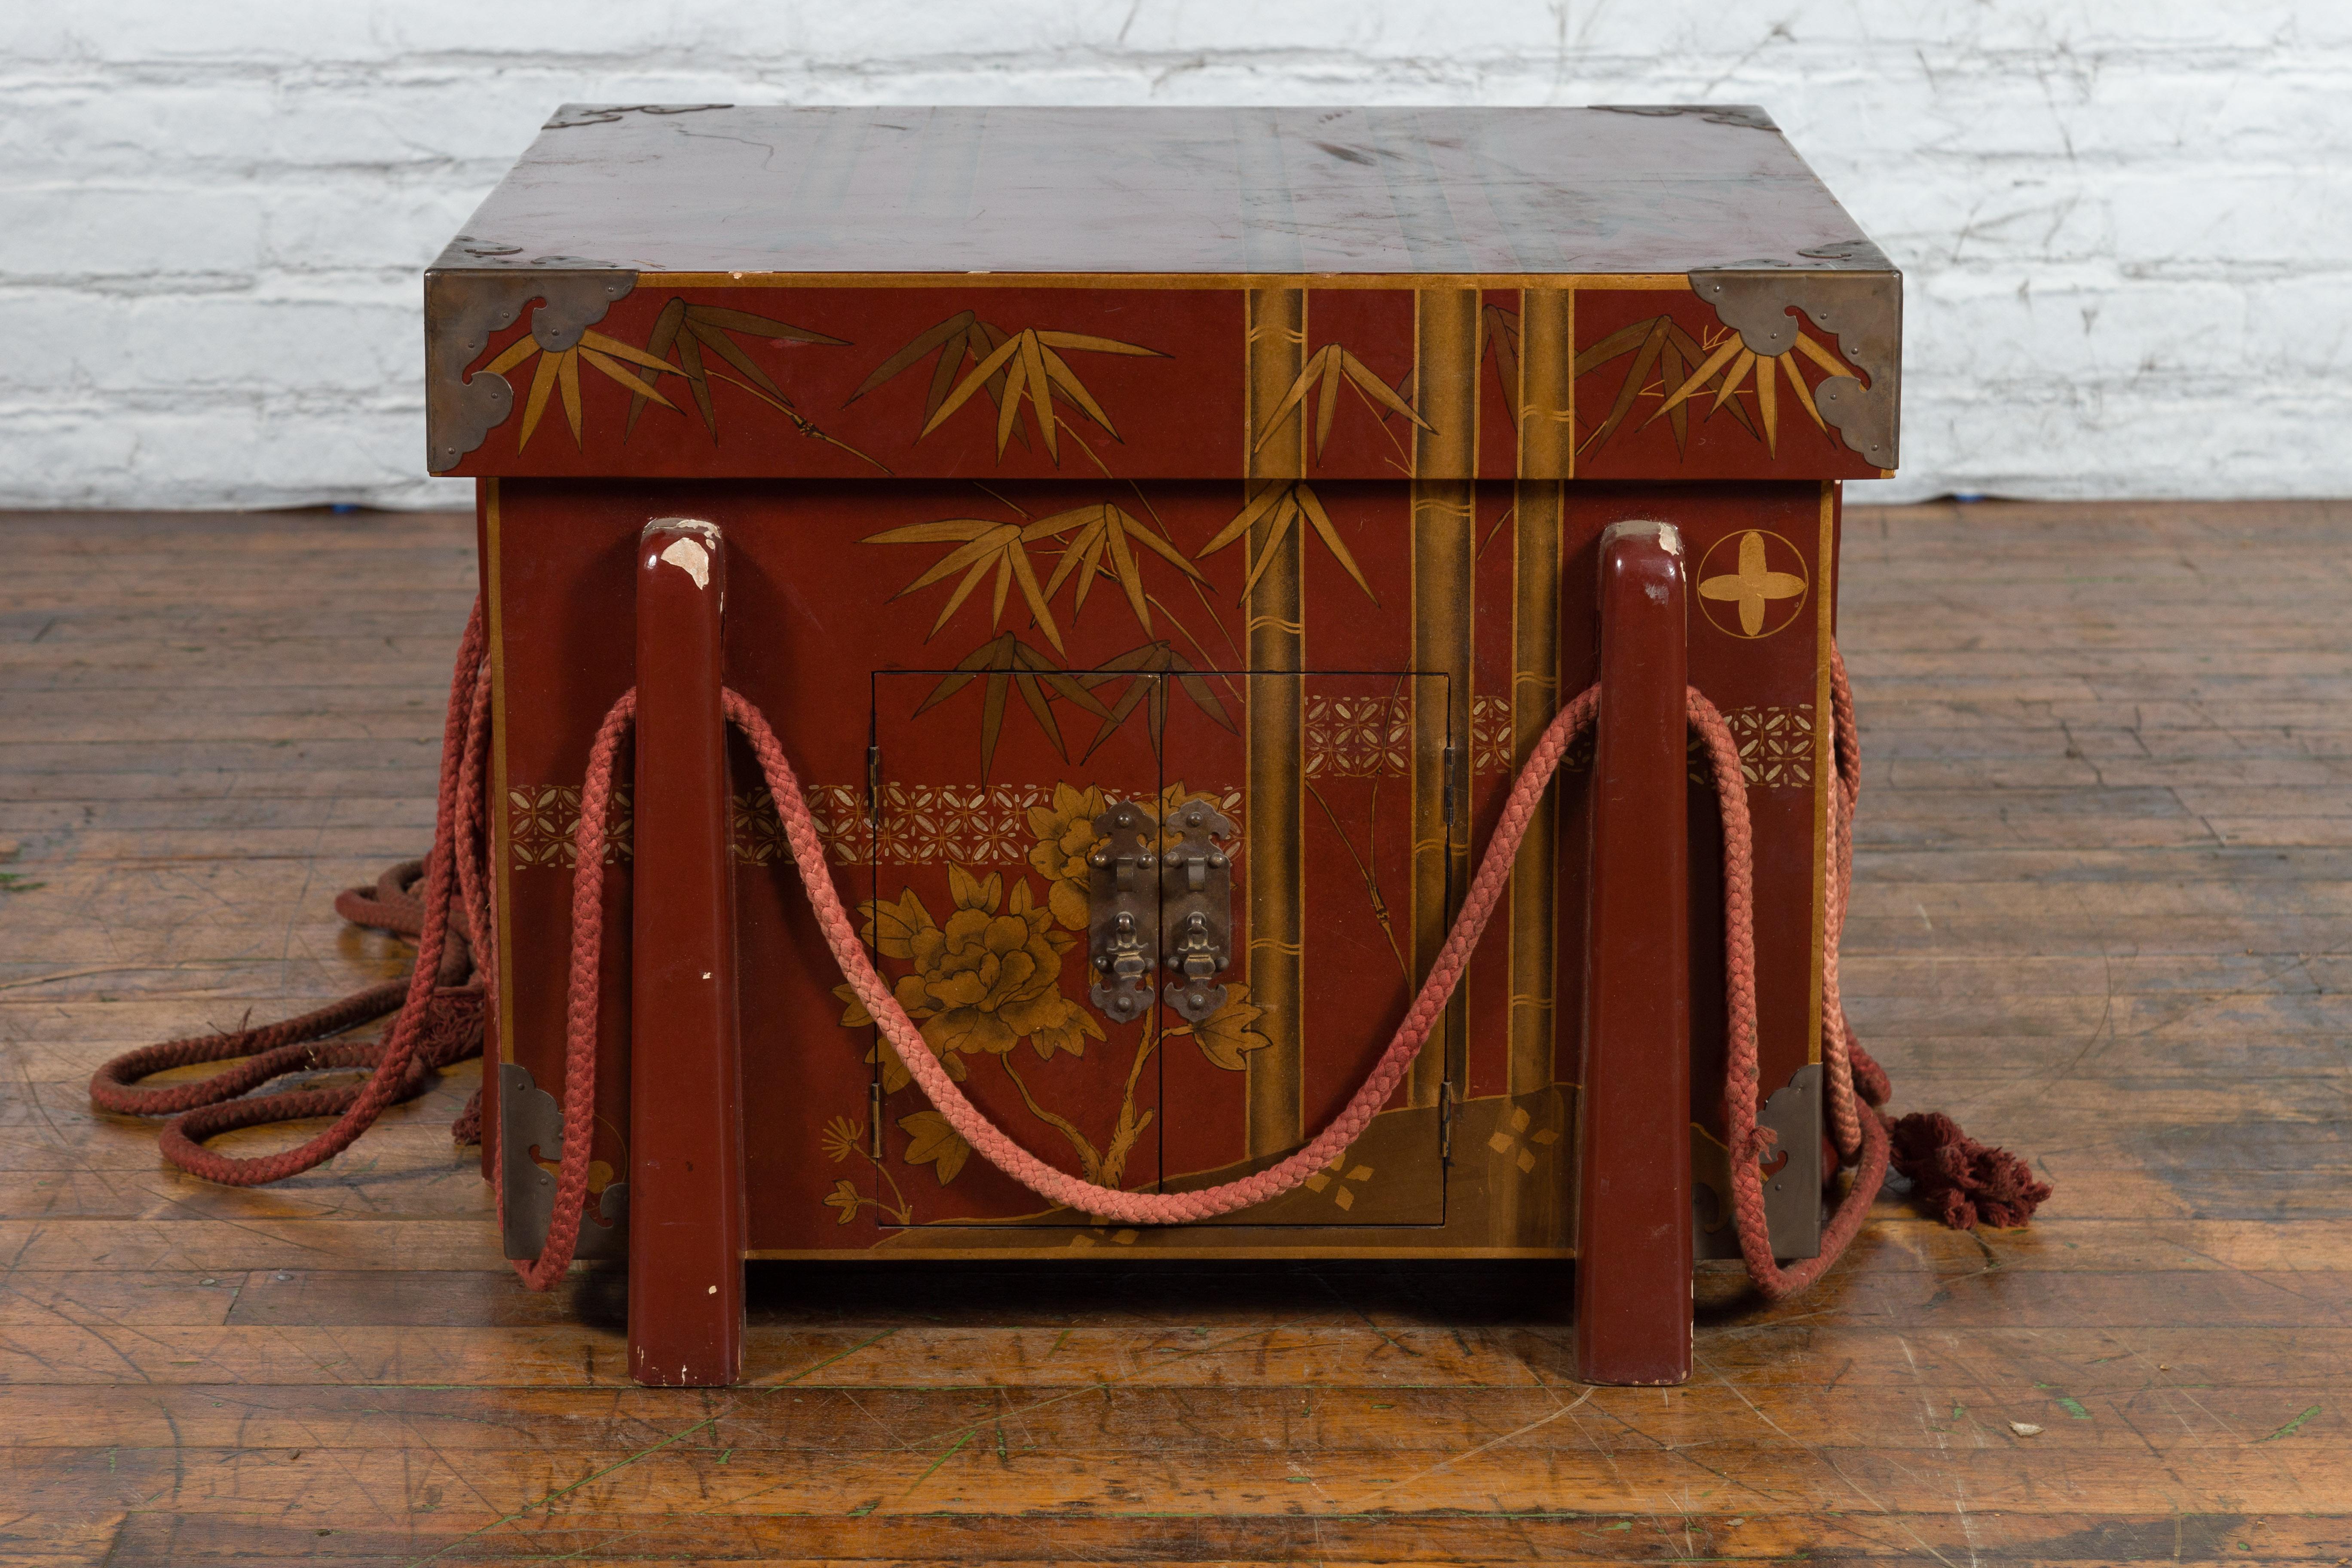 A vintage Japanese oxblood red lacquered wedding chest from the mid 20th century, with hand-painted foliage décor, two small doors and ropes. Created in Japan during the midcentury period, this vintage wedding box features an oxblood red lacquer